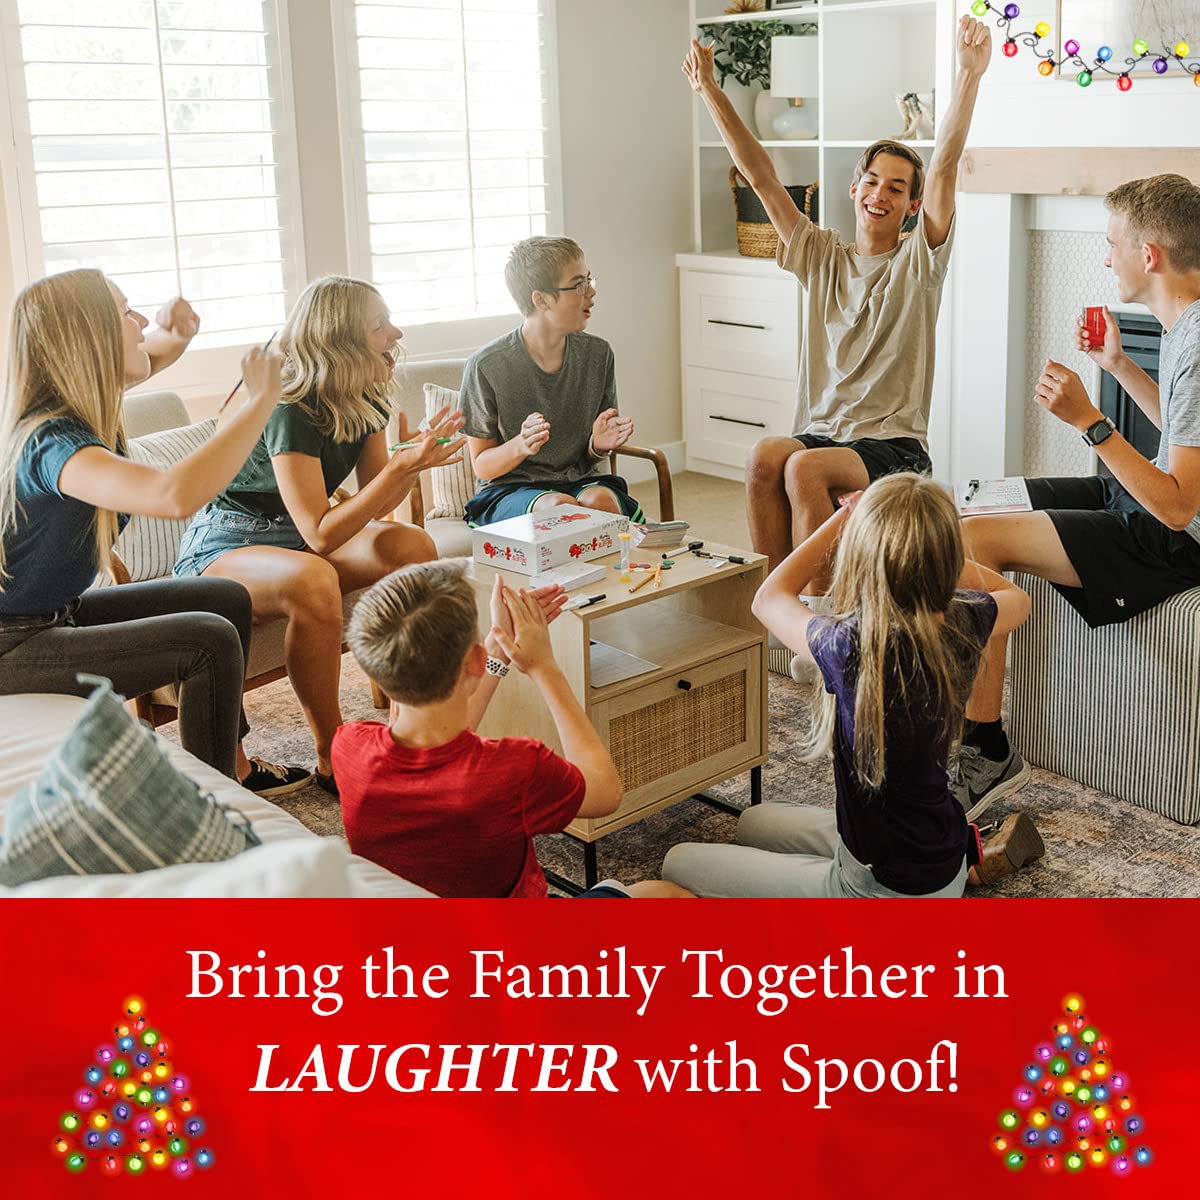 Spoof - The New Popular Hilarious Family Party Bluffing Board Game | for Adults & Teens, Kids Ages 8-12 and Up | Fun Games for Game Night | Great Gift Idea